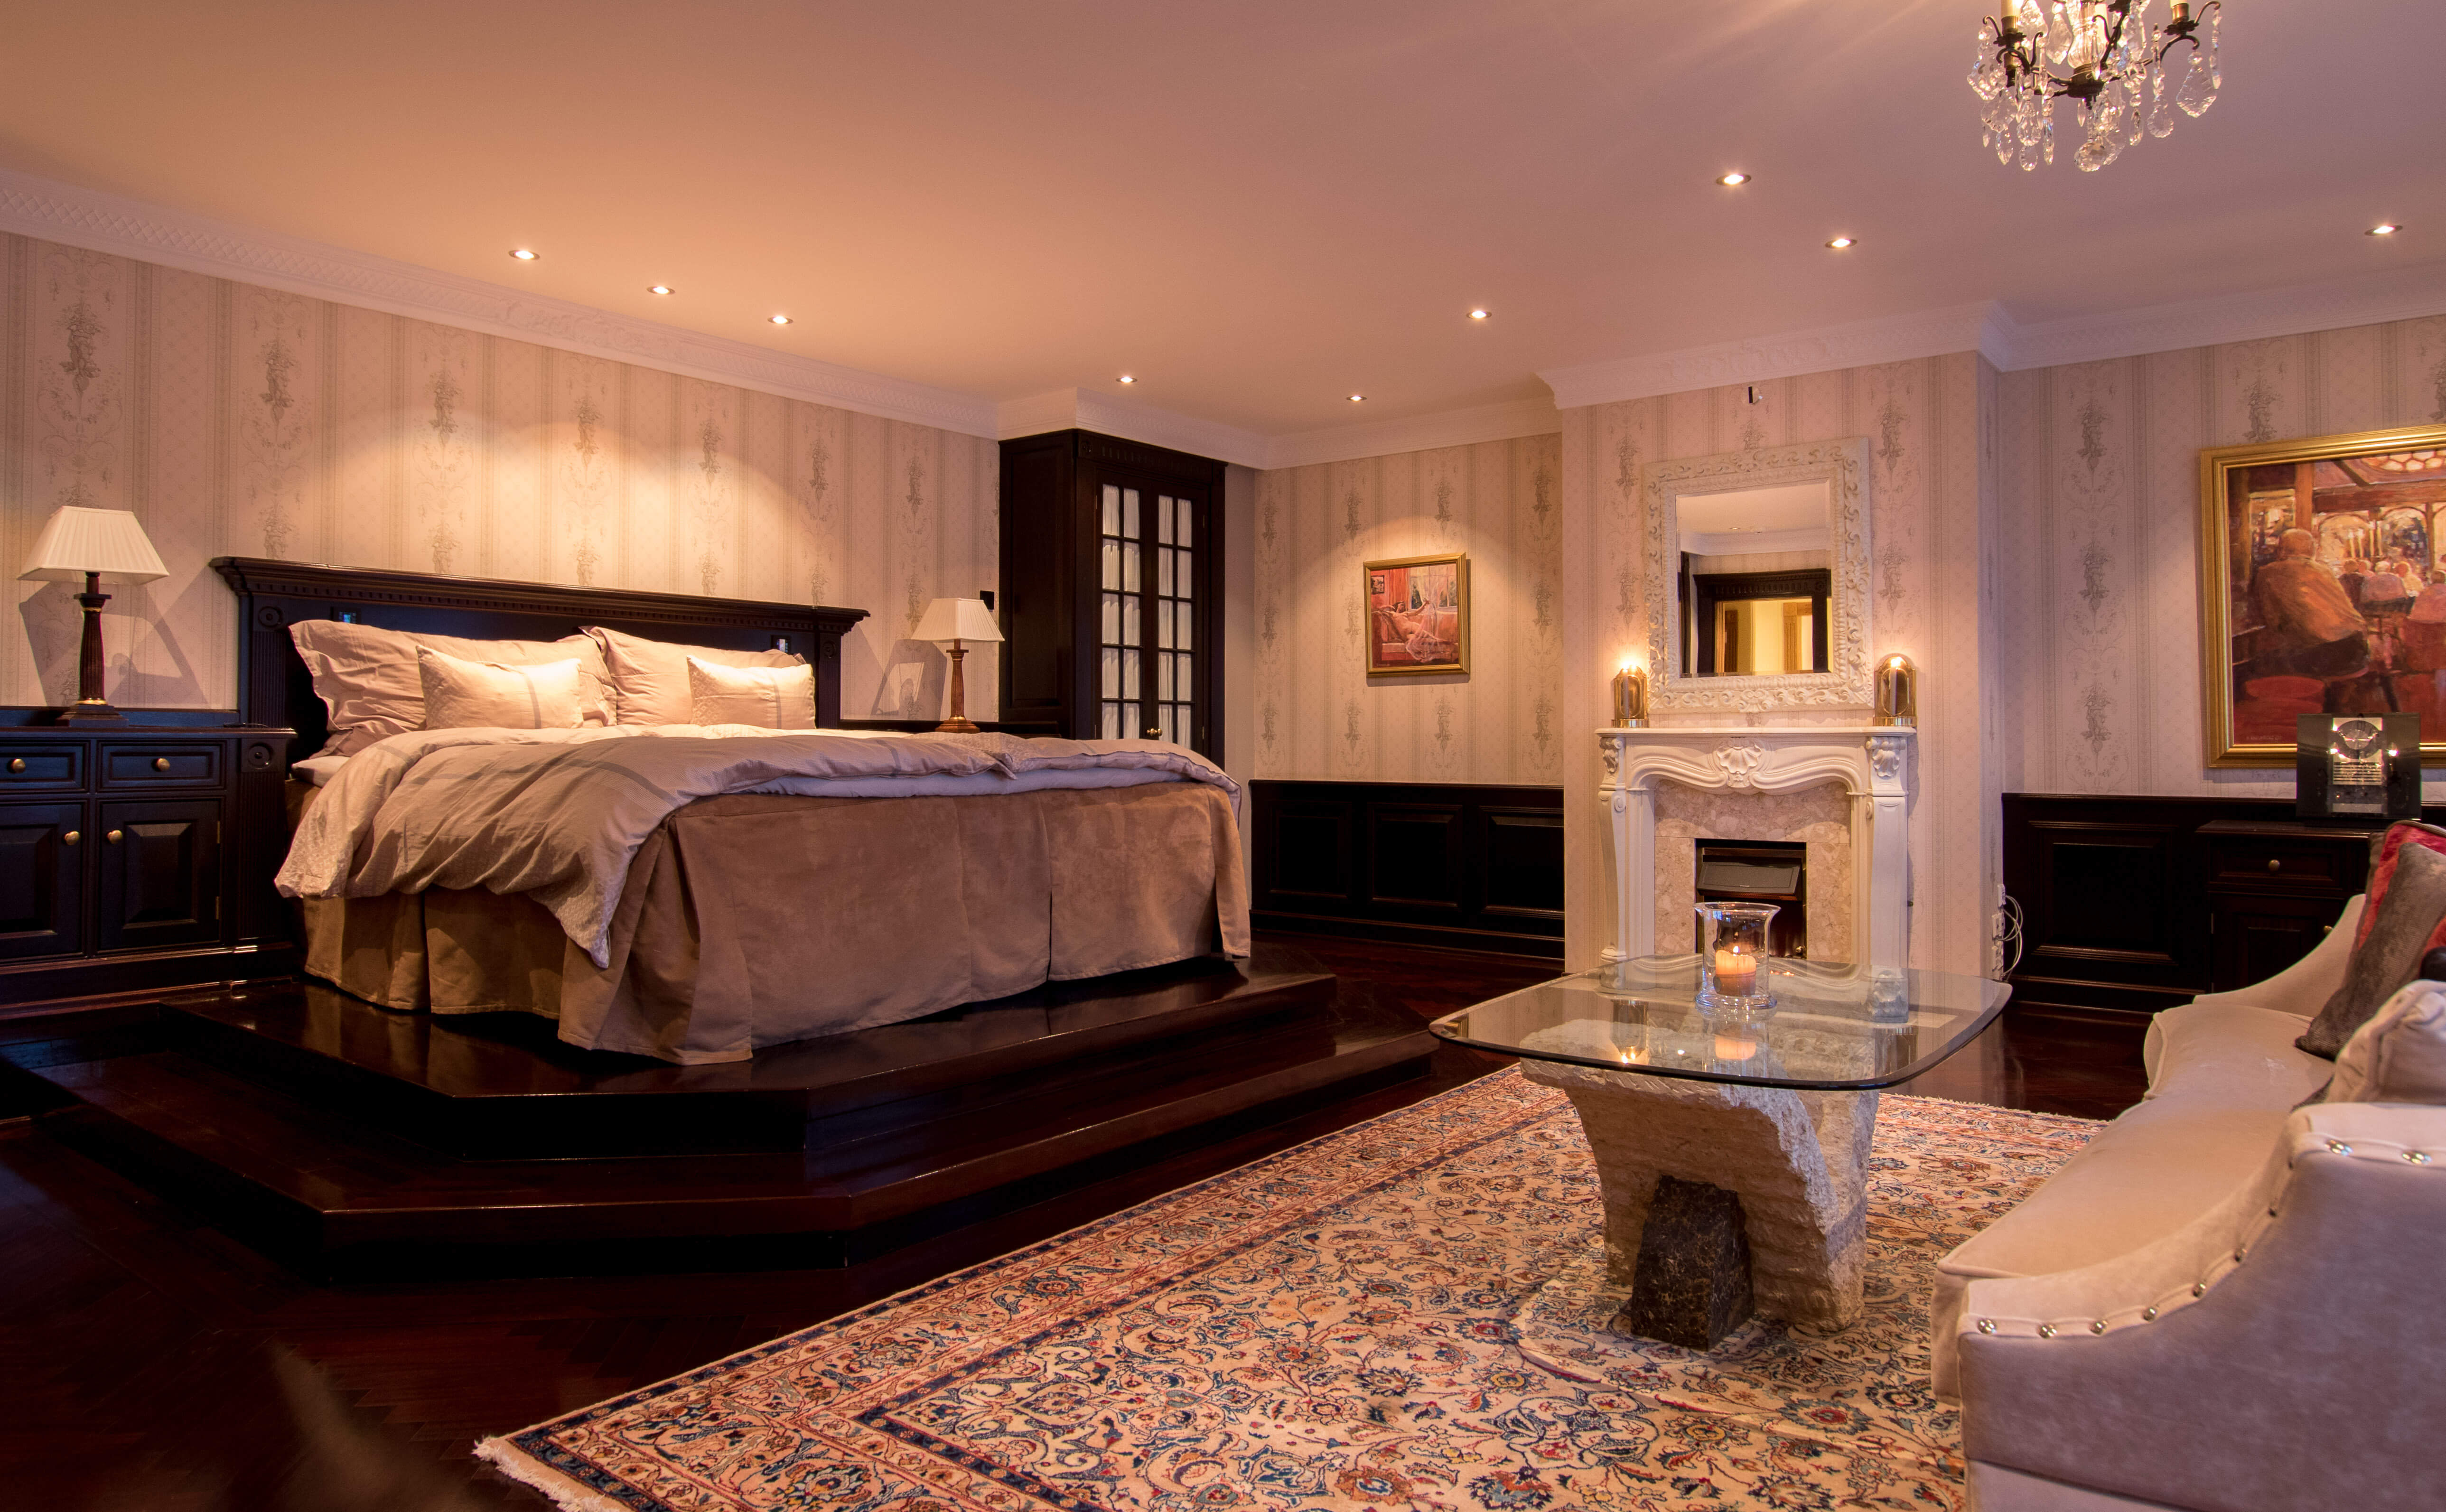 Master bedroom with private fireplace.